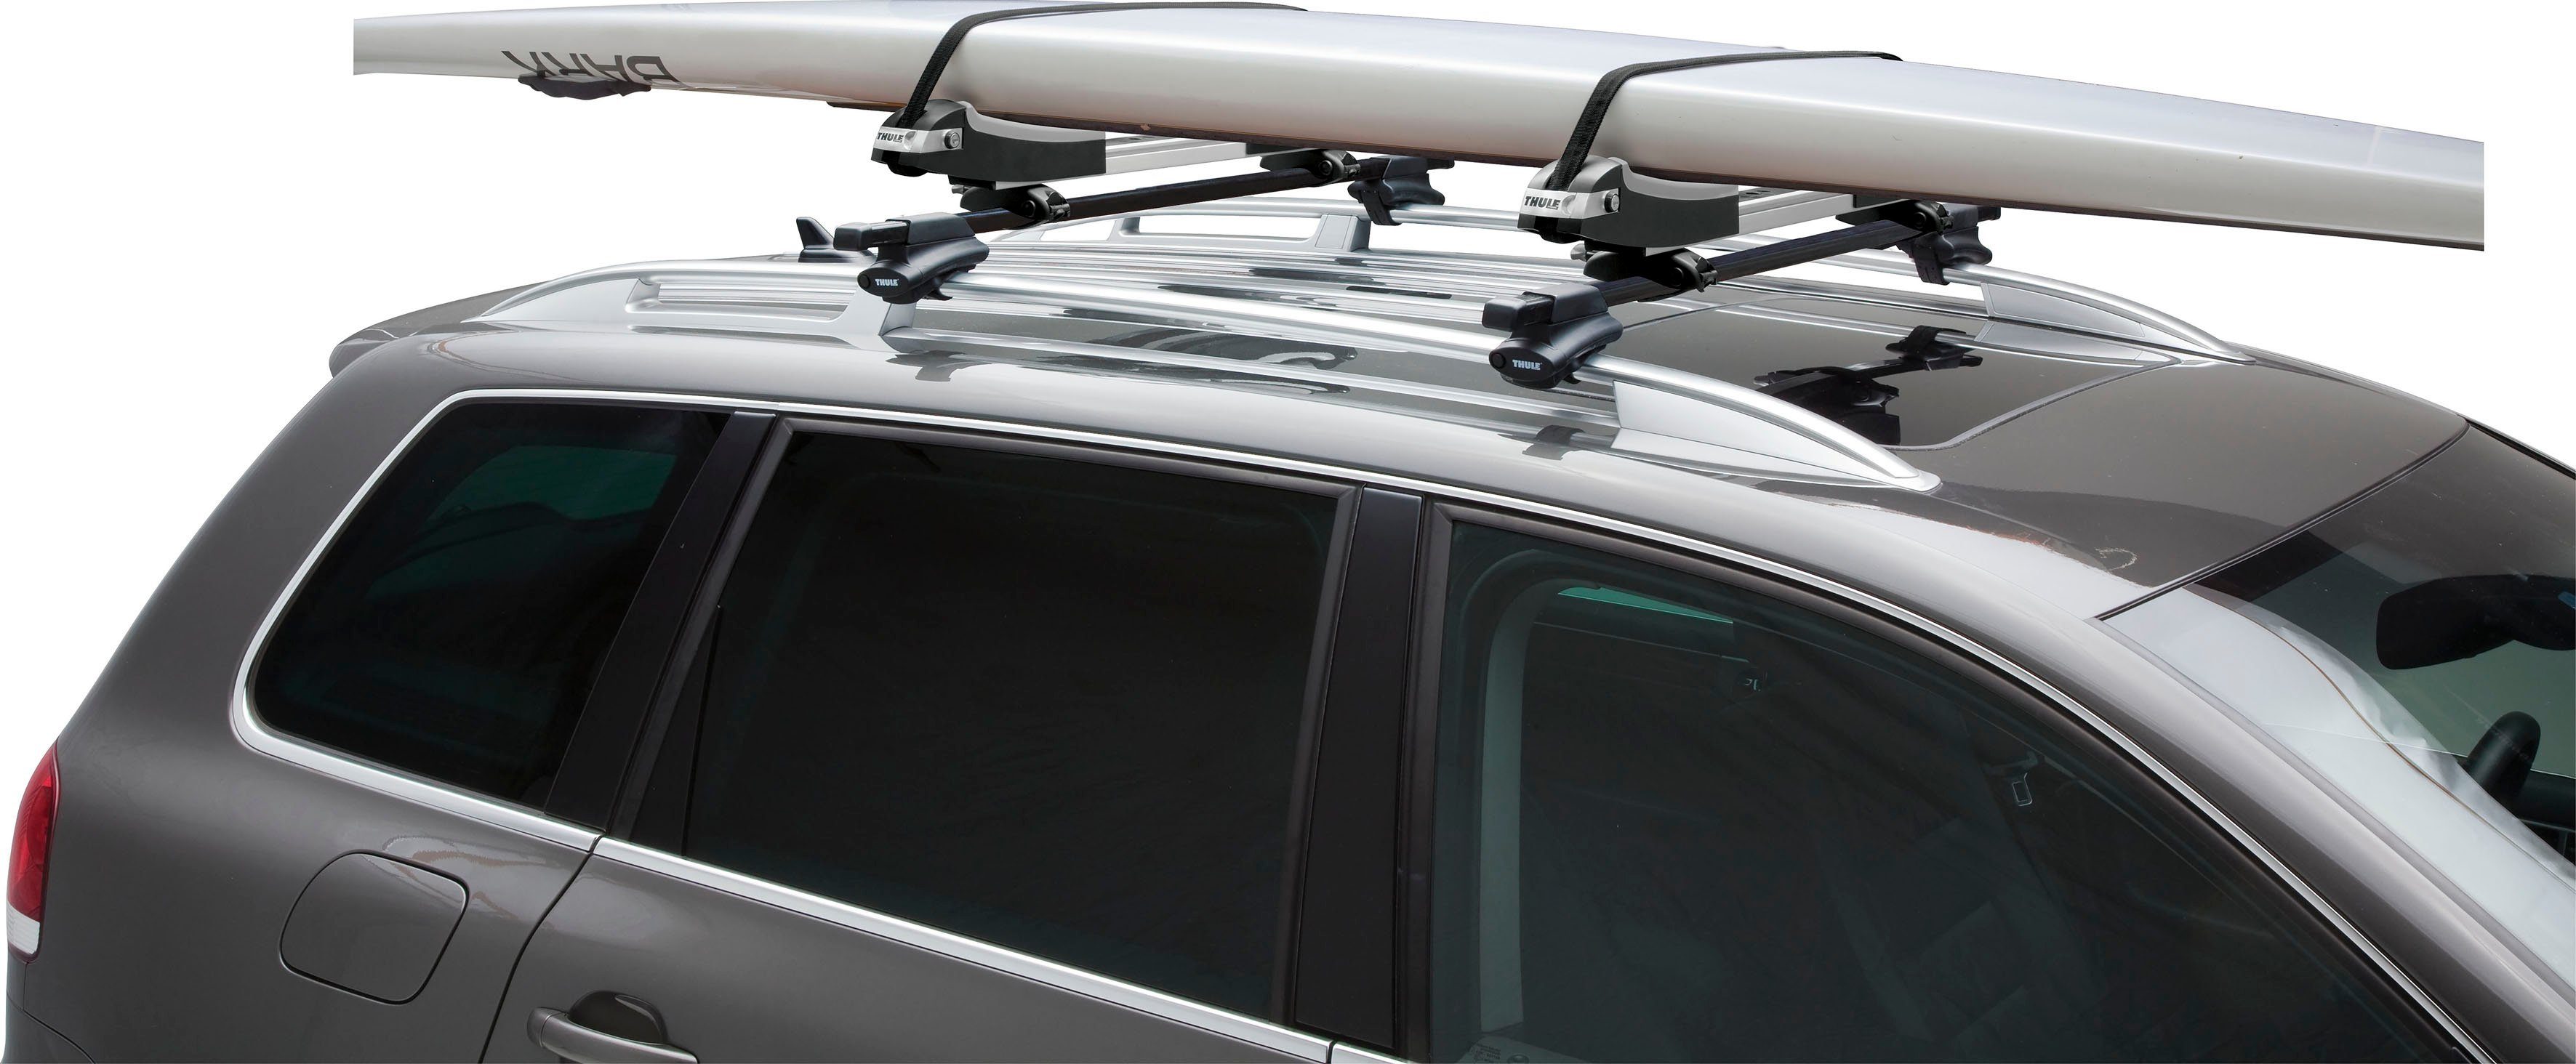 für Dachträger SUP-Boards Thule XT, Taxi SUP